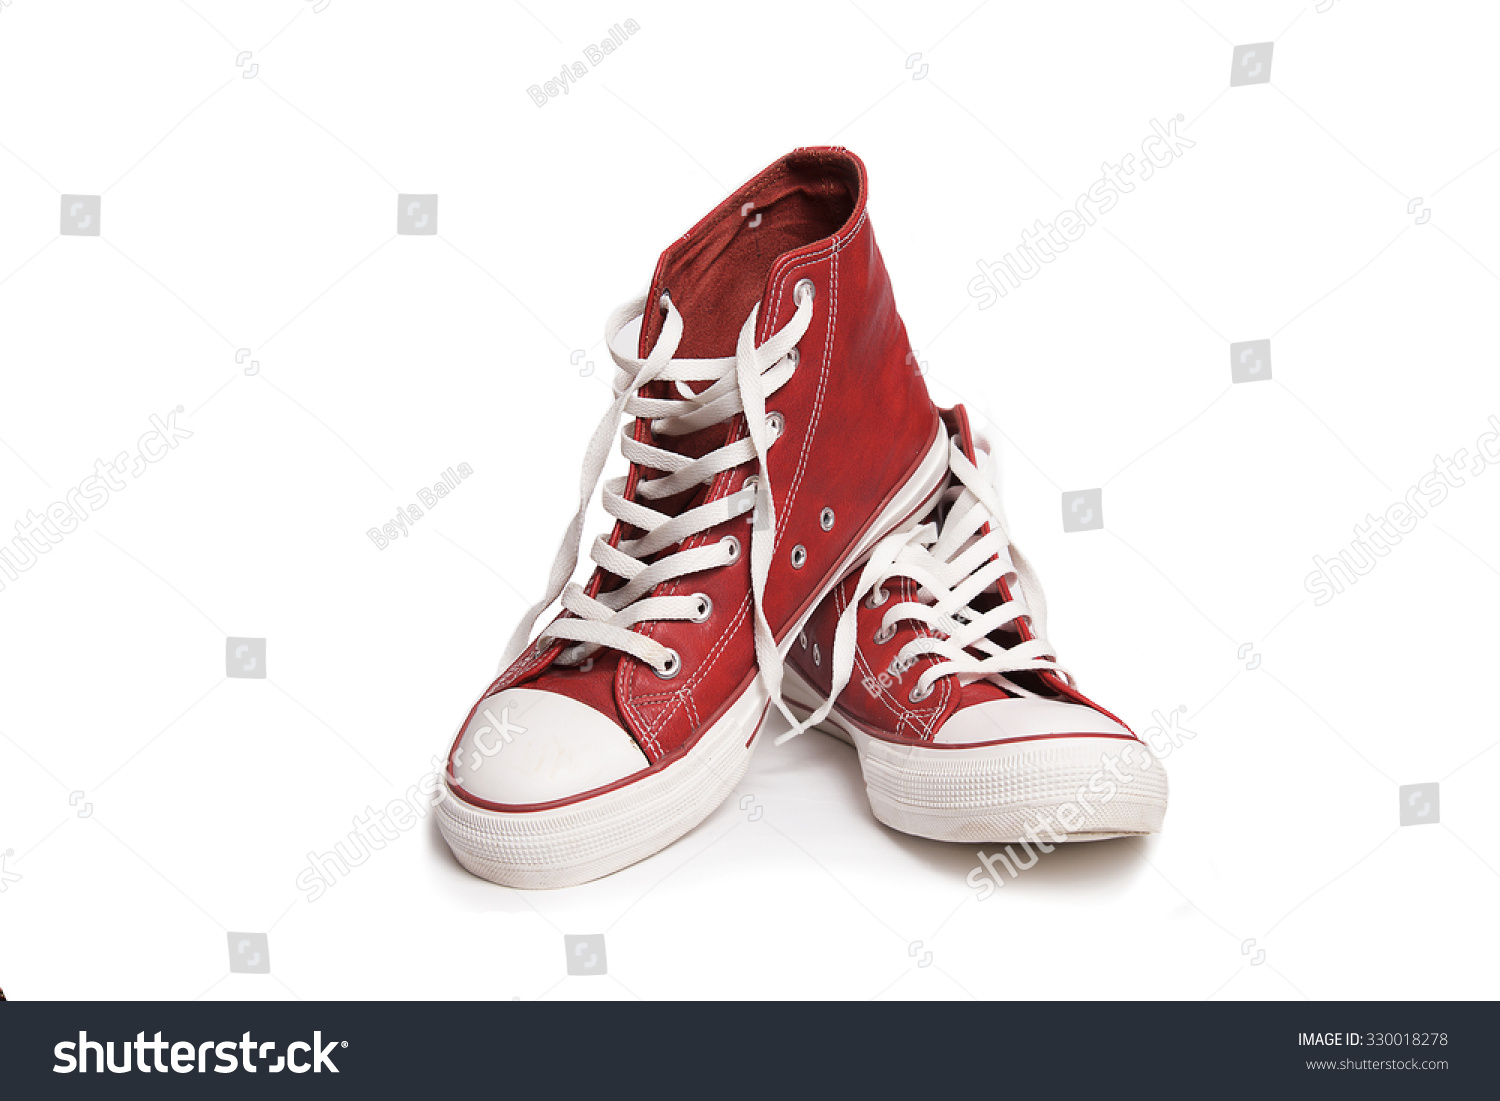 Pair of new red sneakers isolated on white background. #330018278